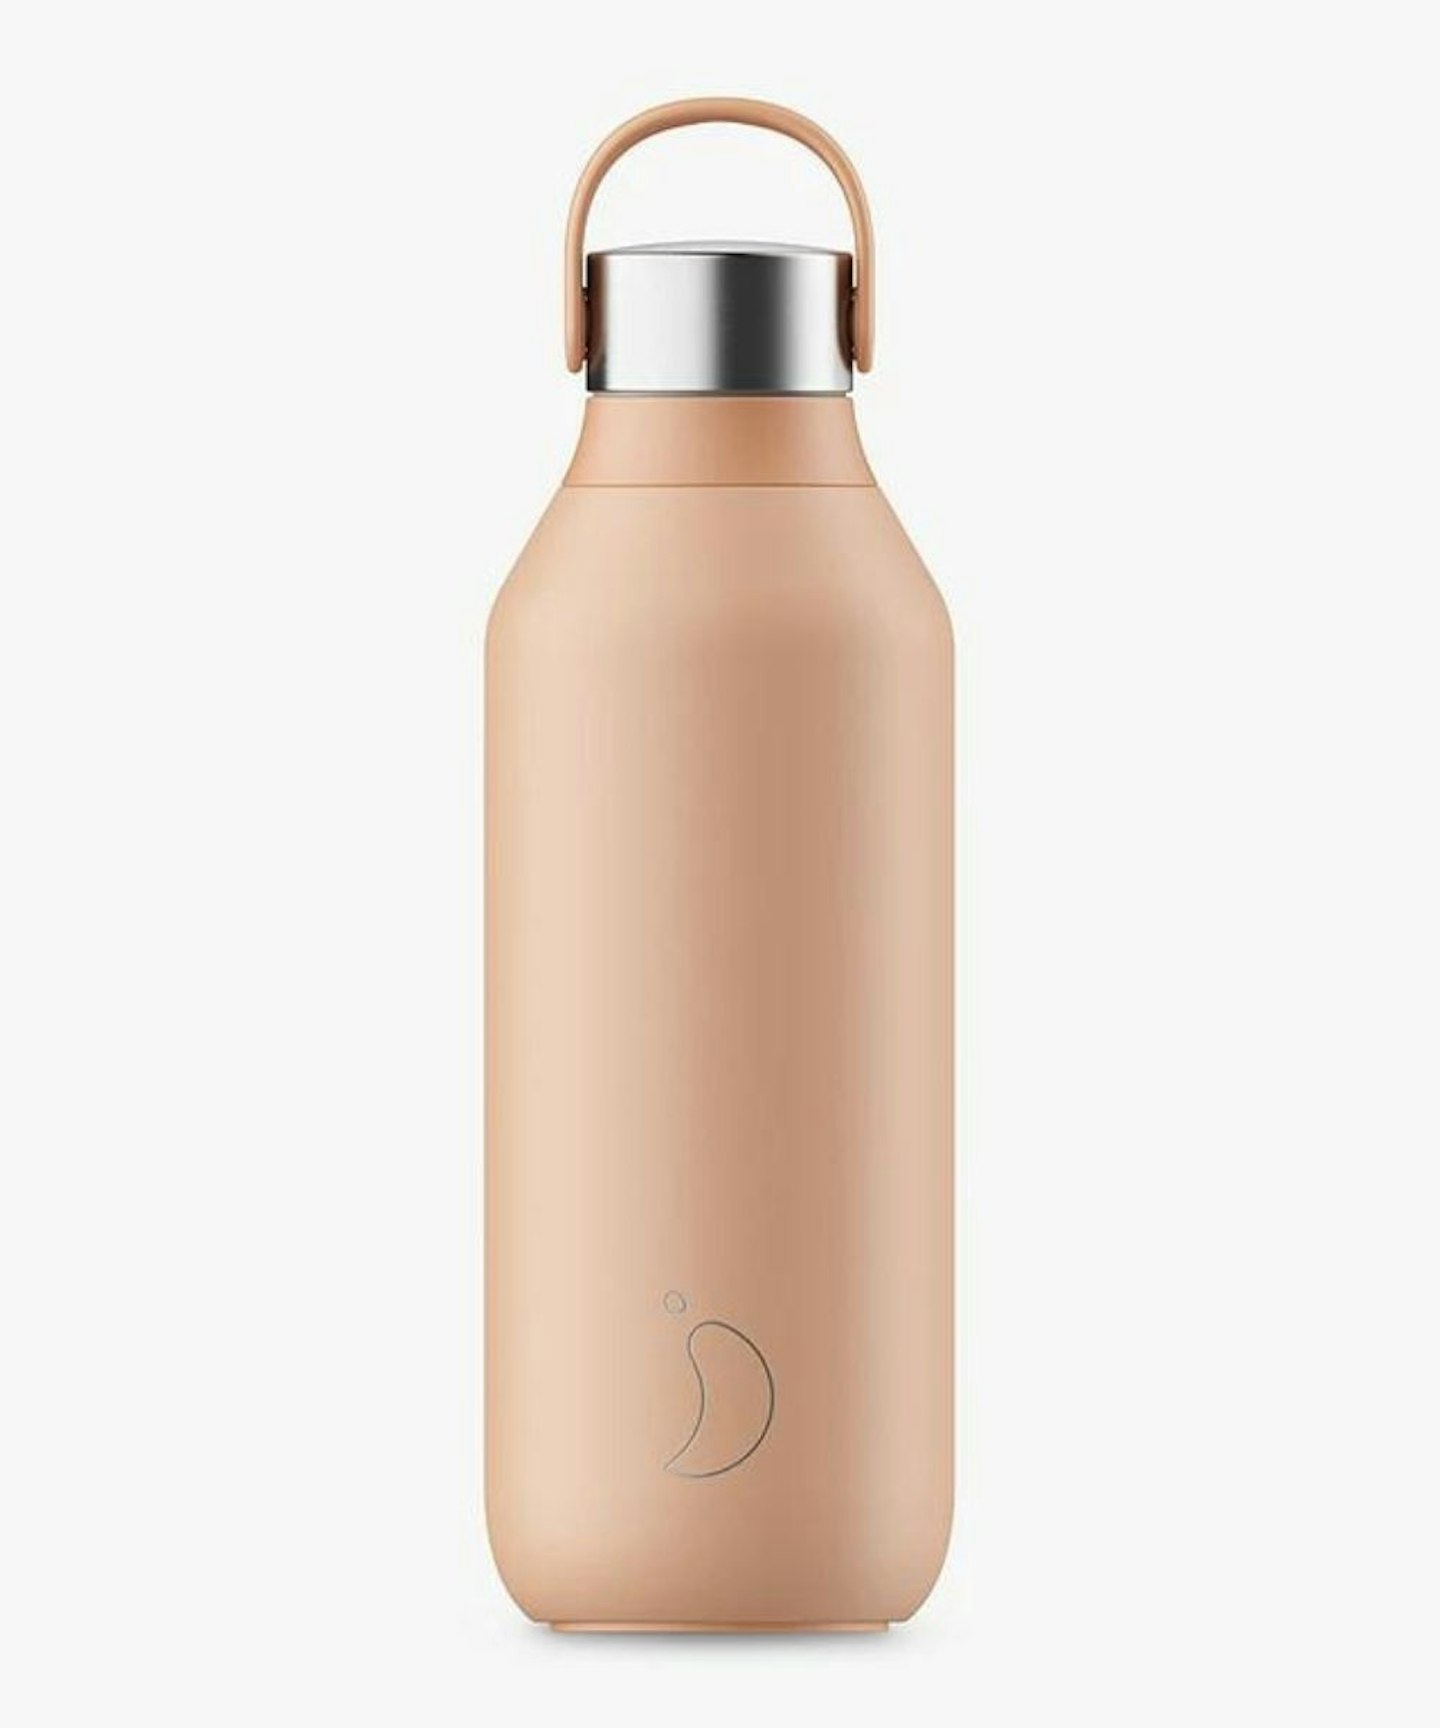 Chilly's Series 2 Insulated Leak-Proof Drinks Bottle